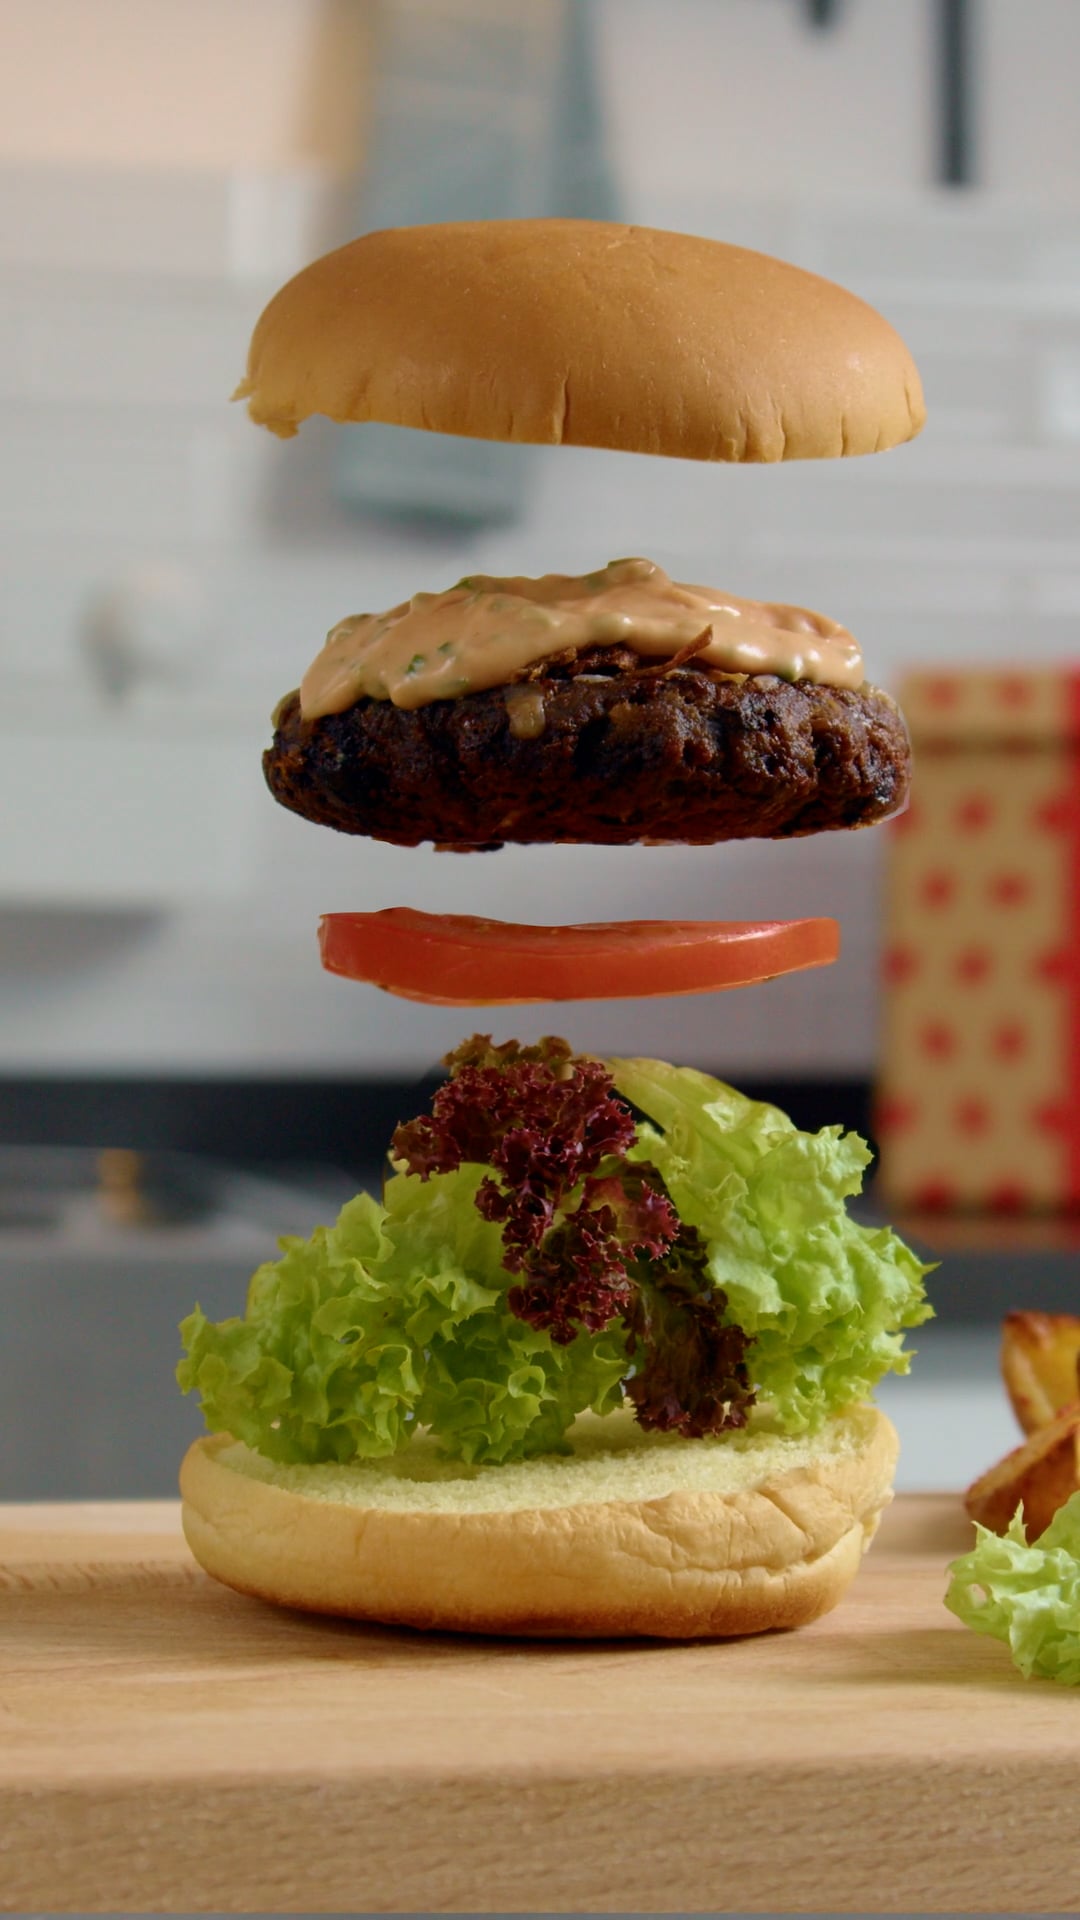 Featured image for “Unbox Classic Cheese Burger – Social Video”